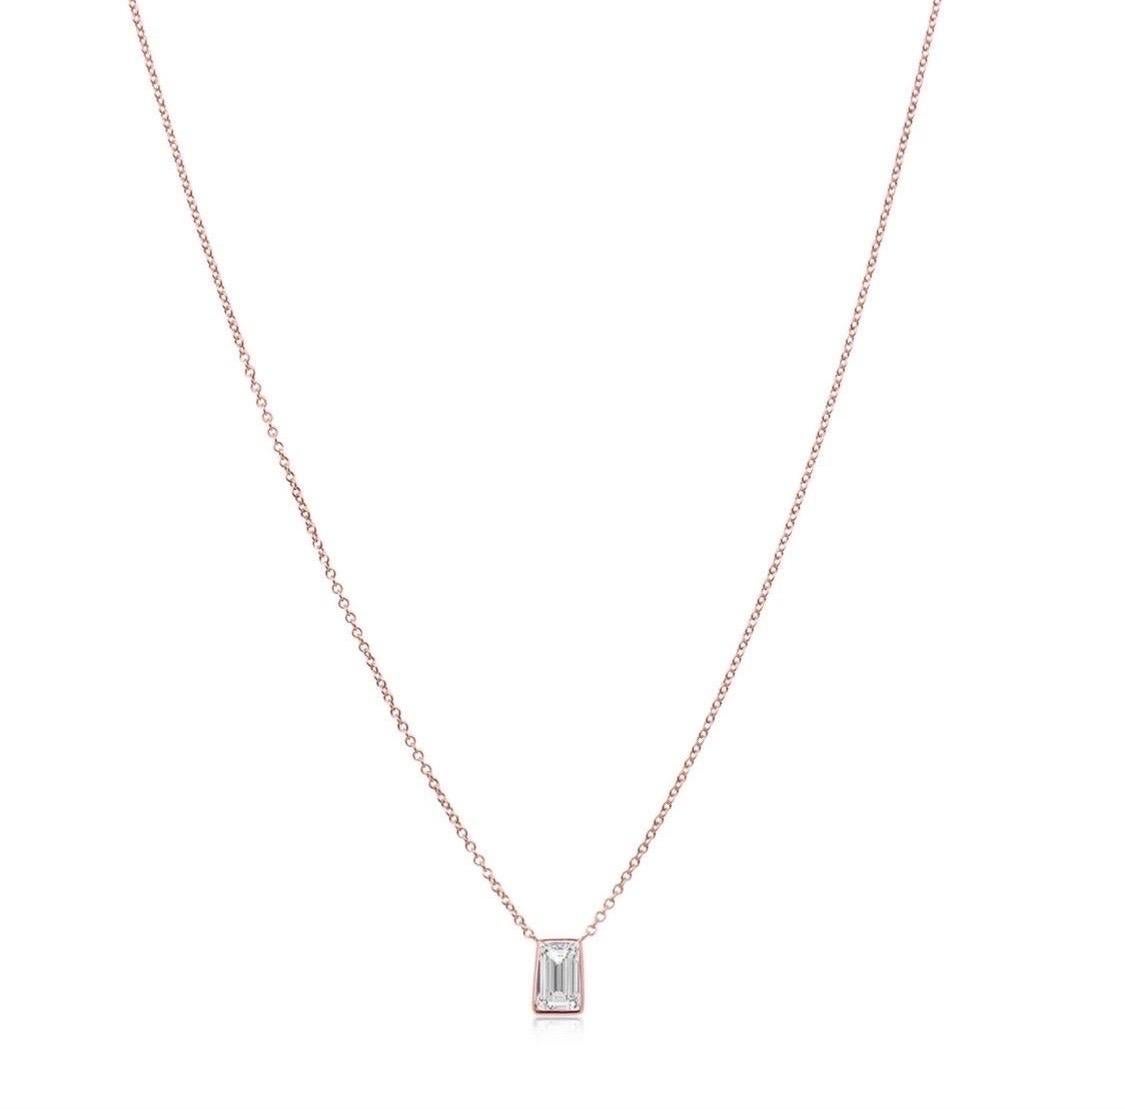 This stunning pendant necklace set in Italian hand made rose gold  setting featuring a charming tapered Asscher cut diamond, weighing 1.02 carats. E color VS1 clarity.
The incredible craftsmanship not often found on pendants this size has the